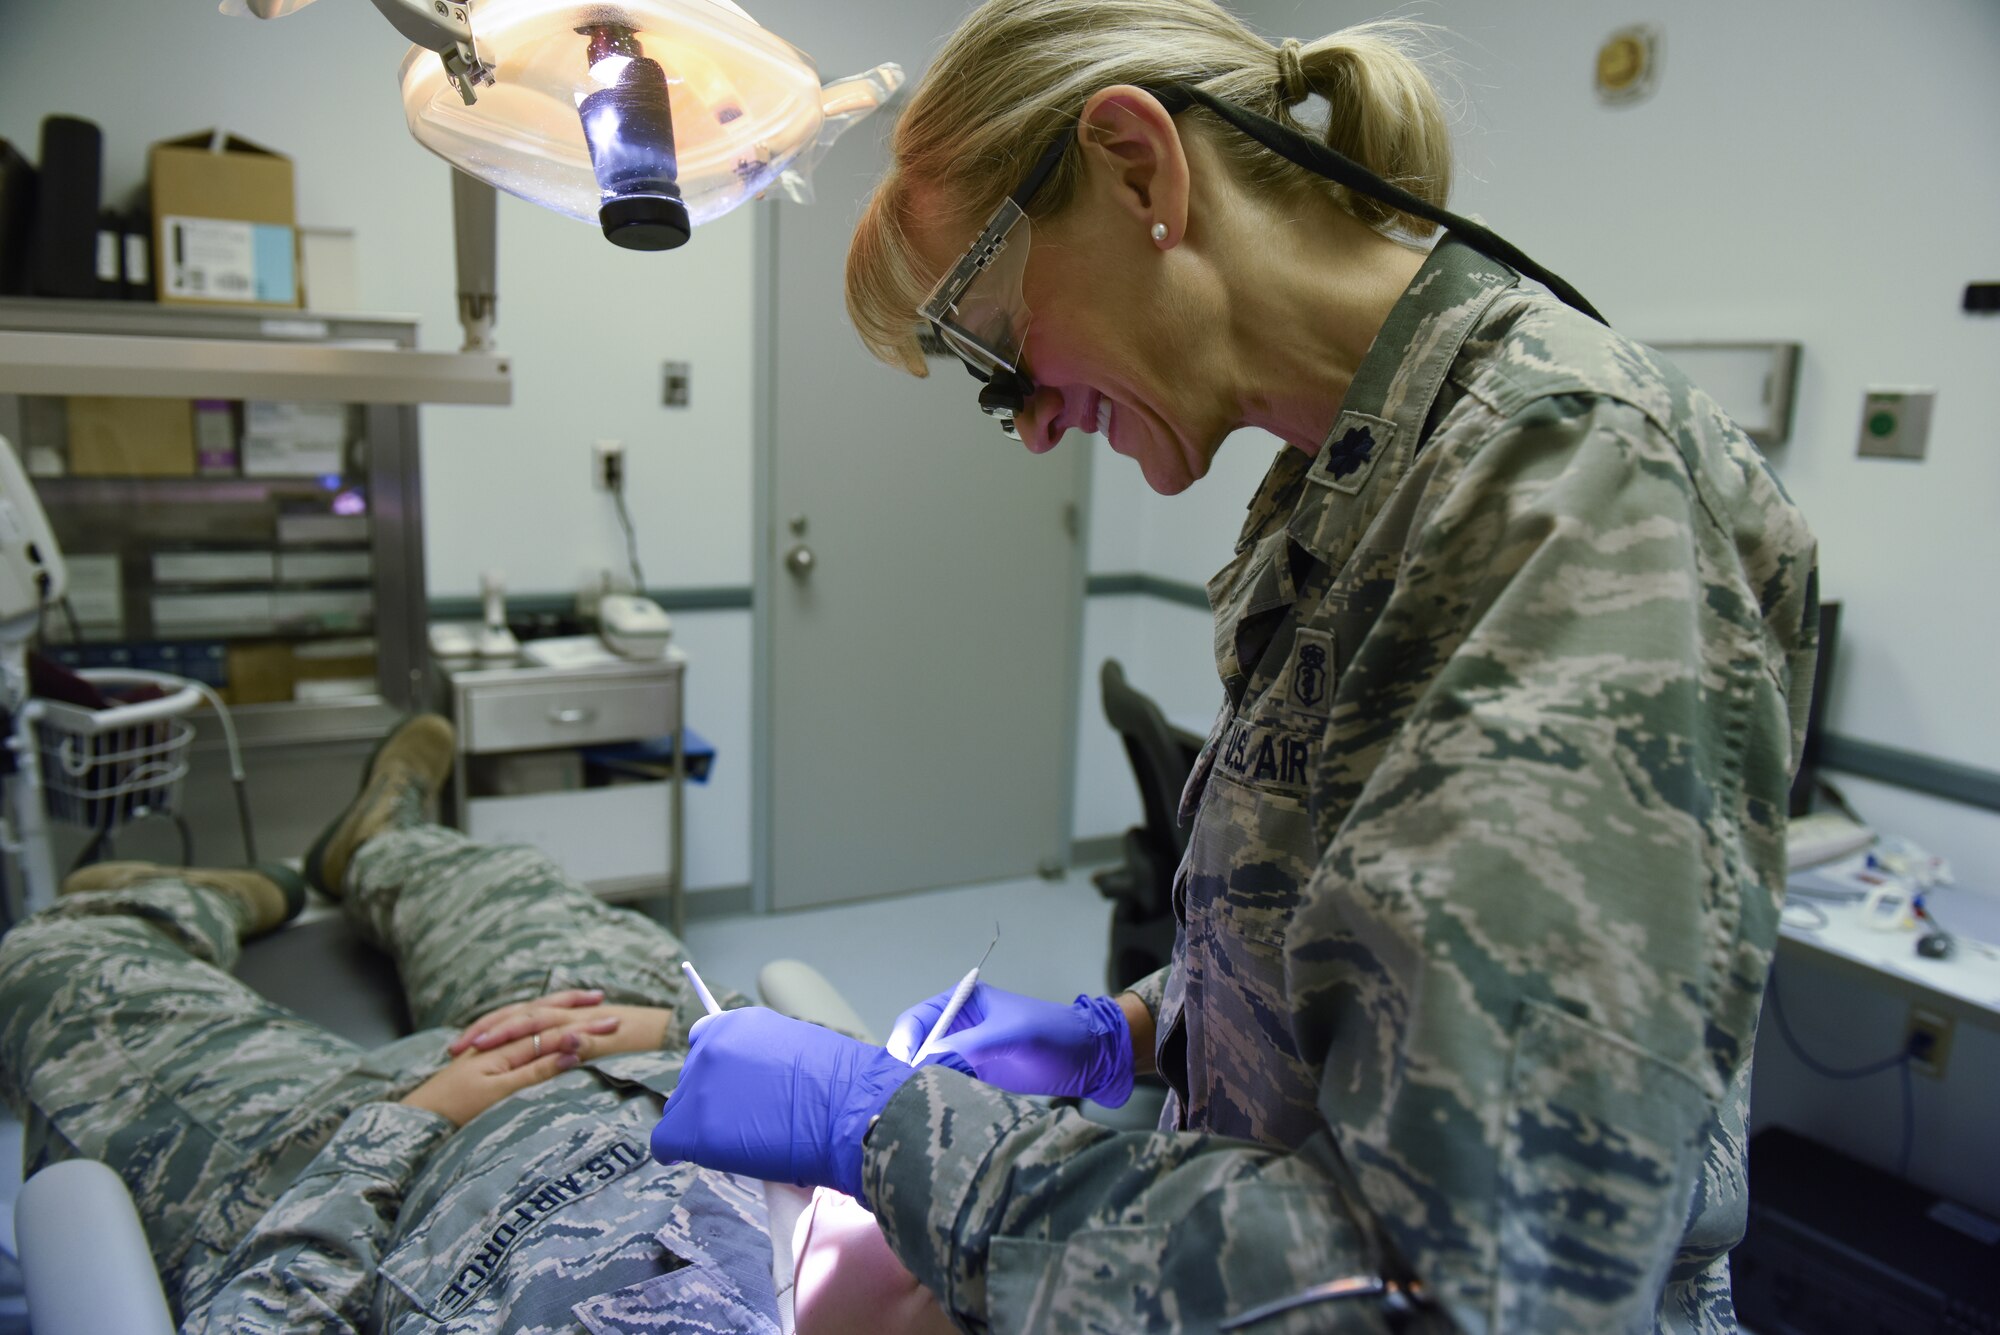 Lt. Col. Nicole Yingling, a dentist with the 193rd Special Operations Medical Group, Middletown, Pennsylvania, performs a routine checkup on an Airman Sept. 22, 2018. Yingling served 11 years as an active duty dentist and after a 12-year break-in-service, enlisted into the 193rd SOMDG. (U.S. Air National Guard photo by Senior Airman Julia Sorber/Released)